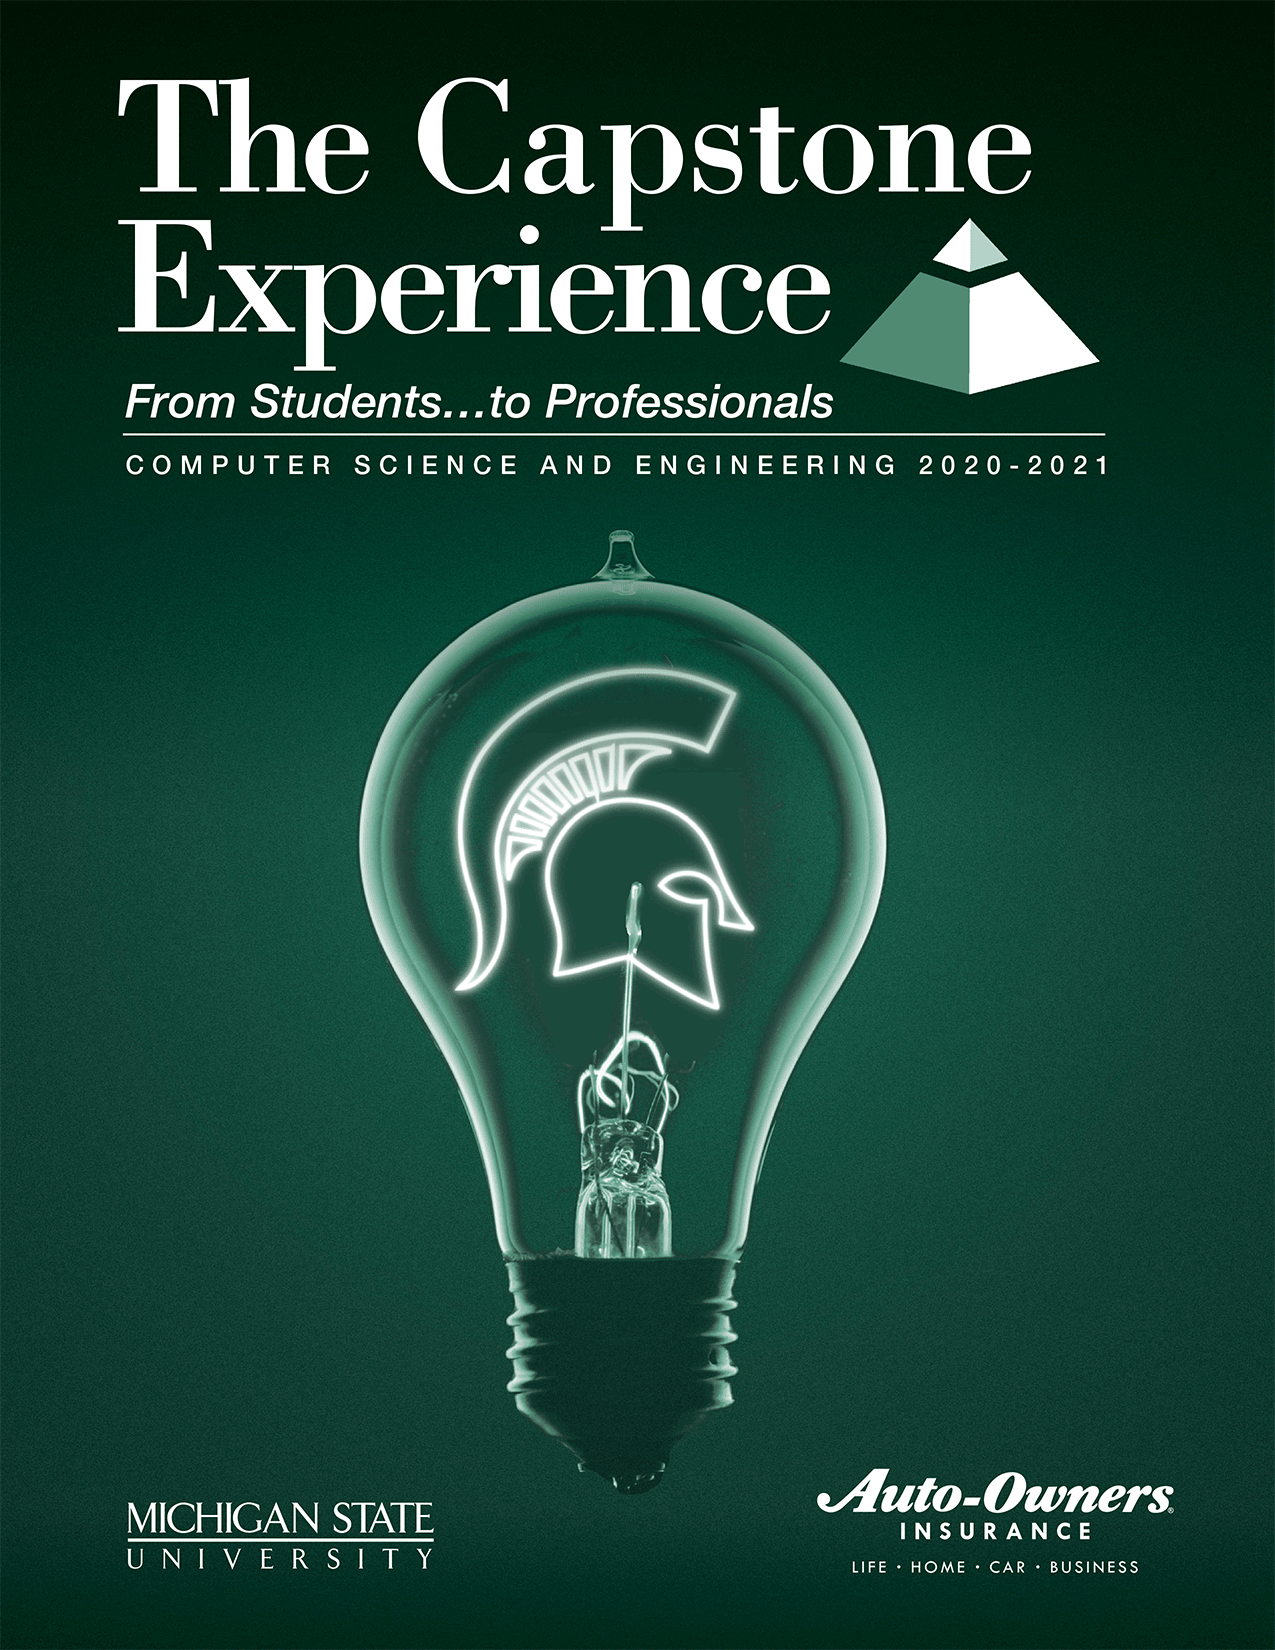 The Capstone Experience Booklet